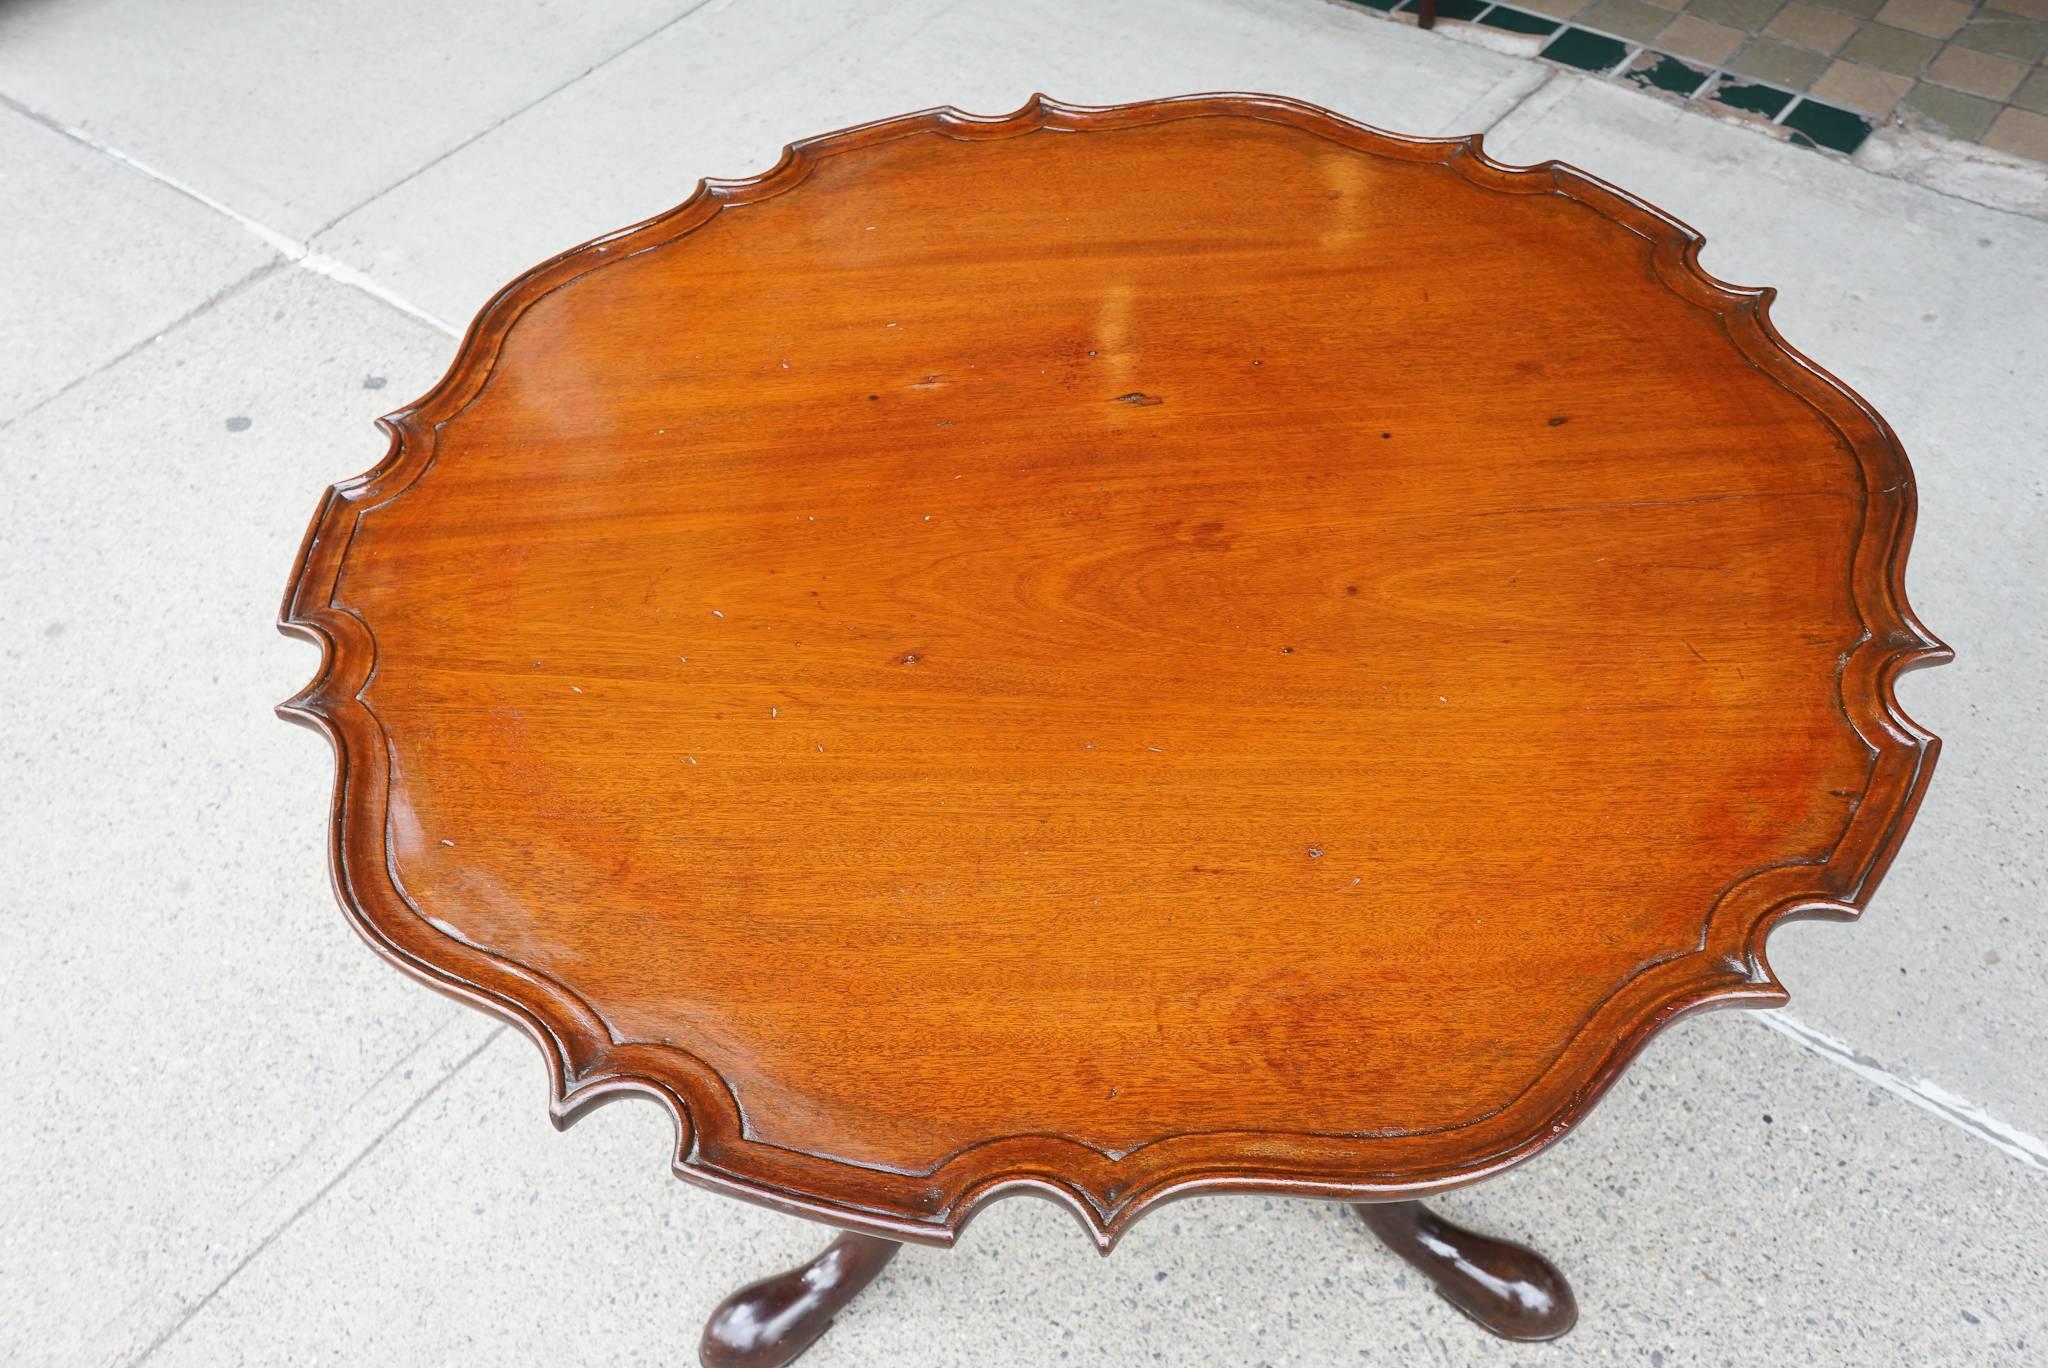 This lovely period tilt-top tea table in rich heavy mahogany is Irish and has all the hallmarks of a provincially made piece of furniture. Crafted with a slightly heavy hand the table is rich in personal details lacking in high style city pieces.